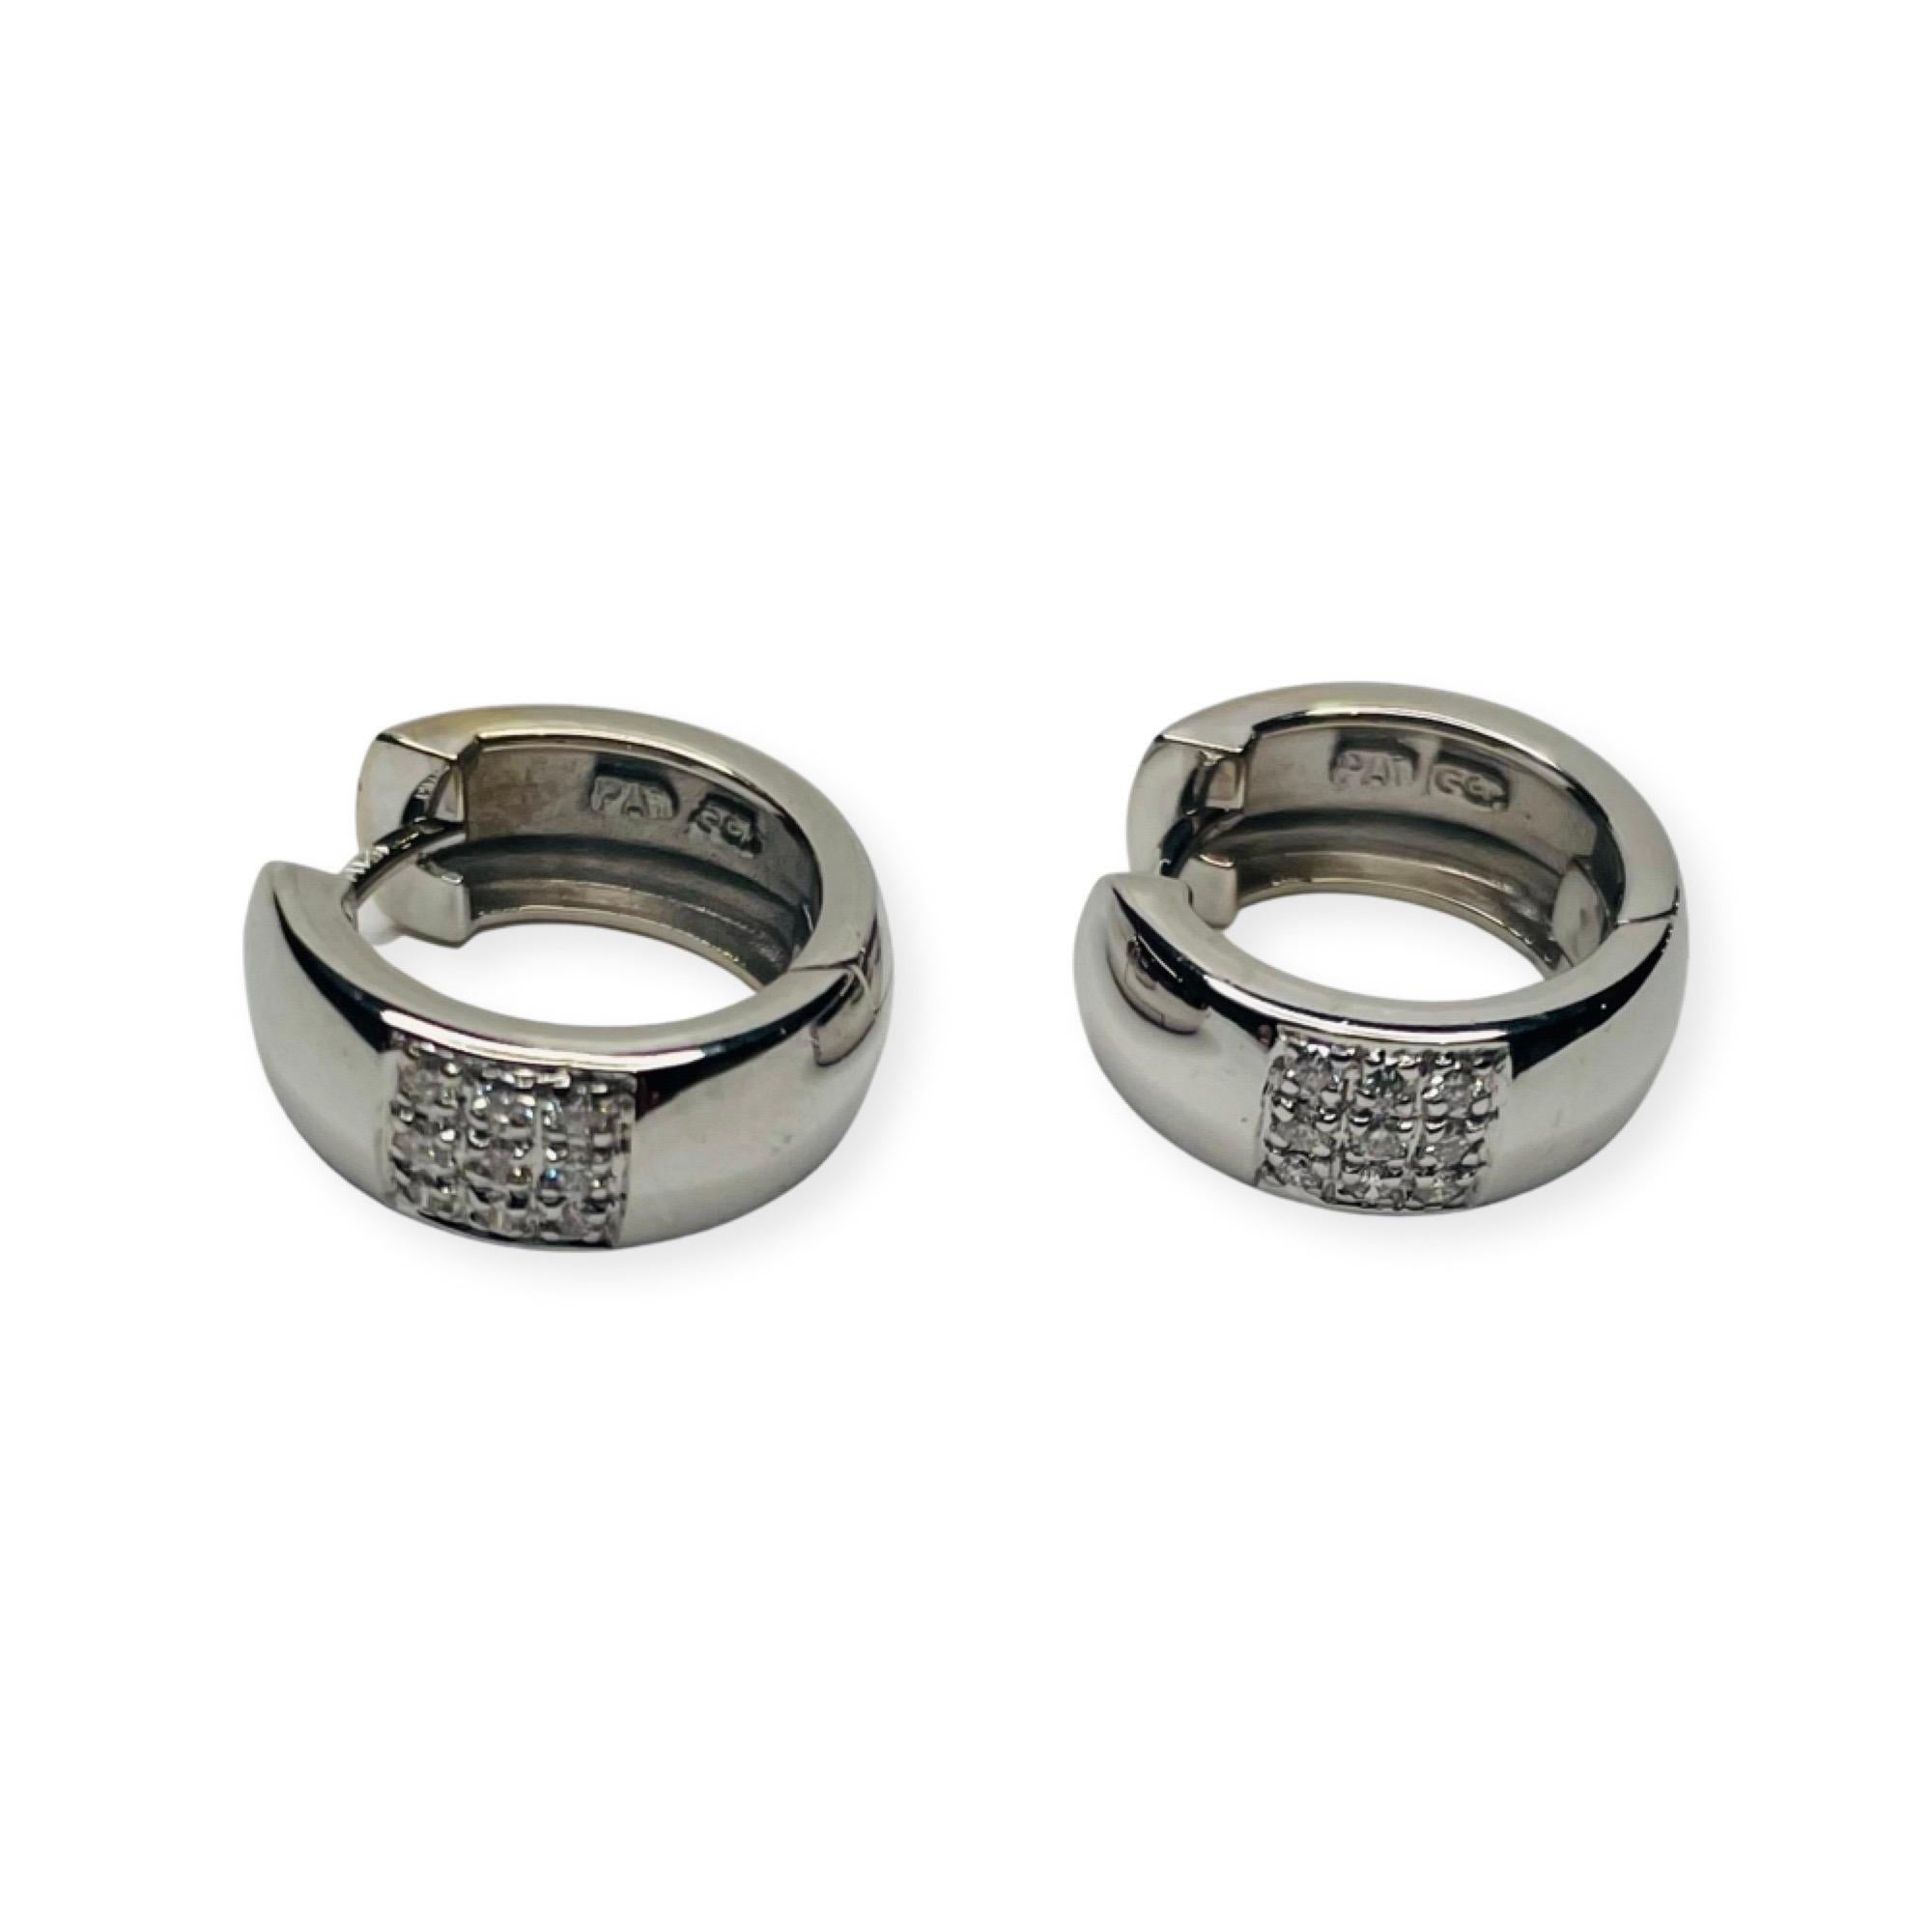 Coge 18K White Gold Diamond Huggie Earrings. The earrings are 15.68 mm in diameter and 5.77 mm in width. There are 9, full cut round brilliant diamonds of VS clarity and F color. They are pave set in a three row square in the front of each huggie.